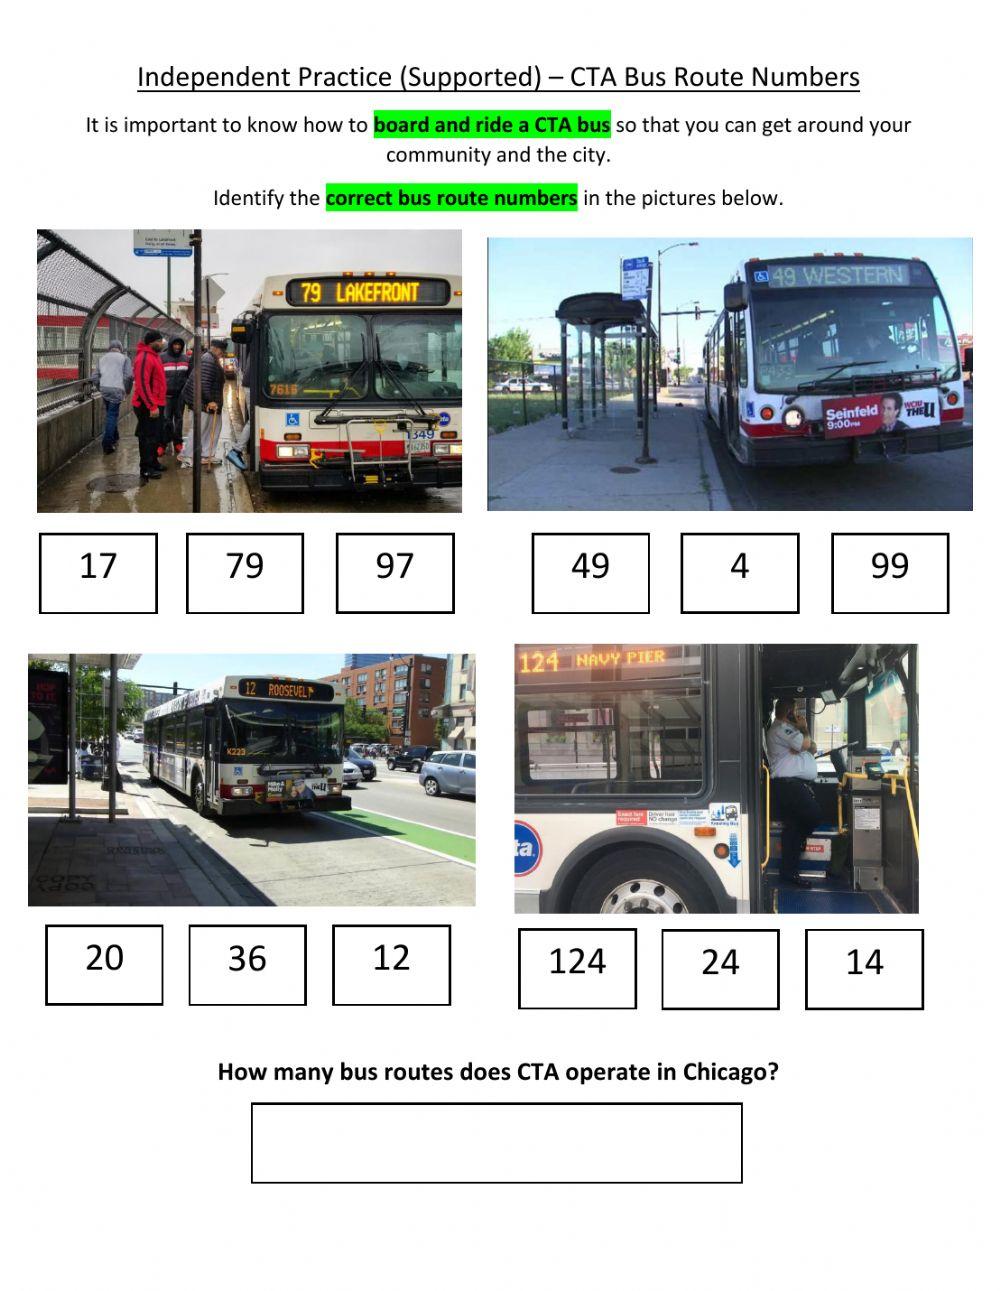 Independent Practice (Supported) - CTA Bus Route Numbers